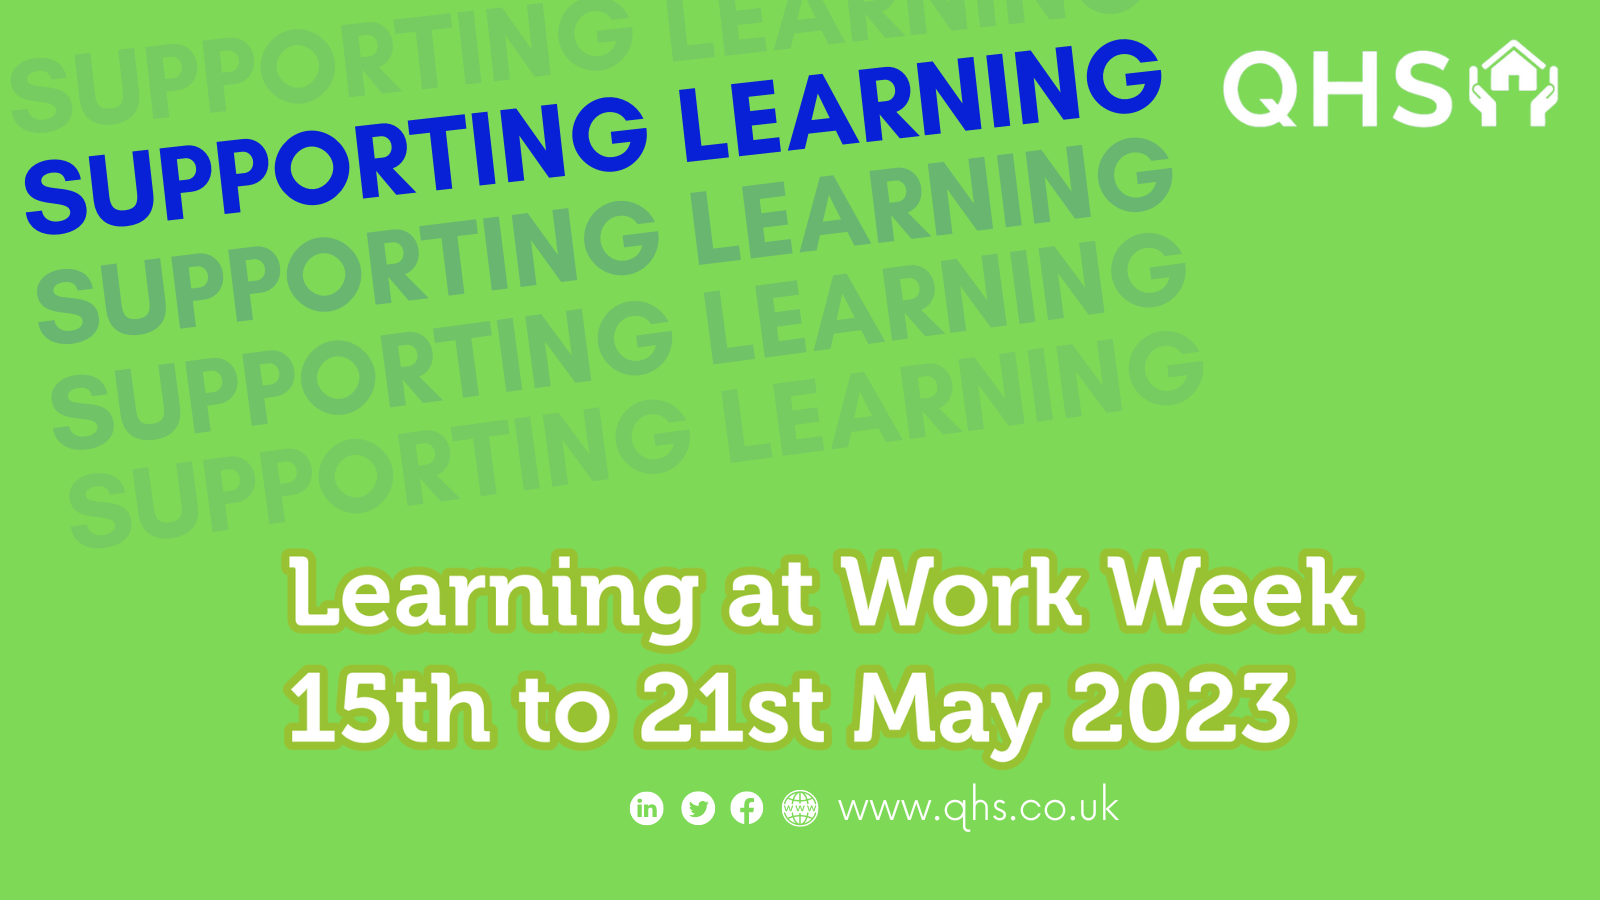 QHS Supported Learning at Work Week 15th - 21st May 2023